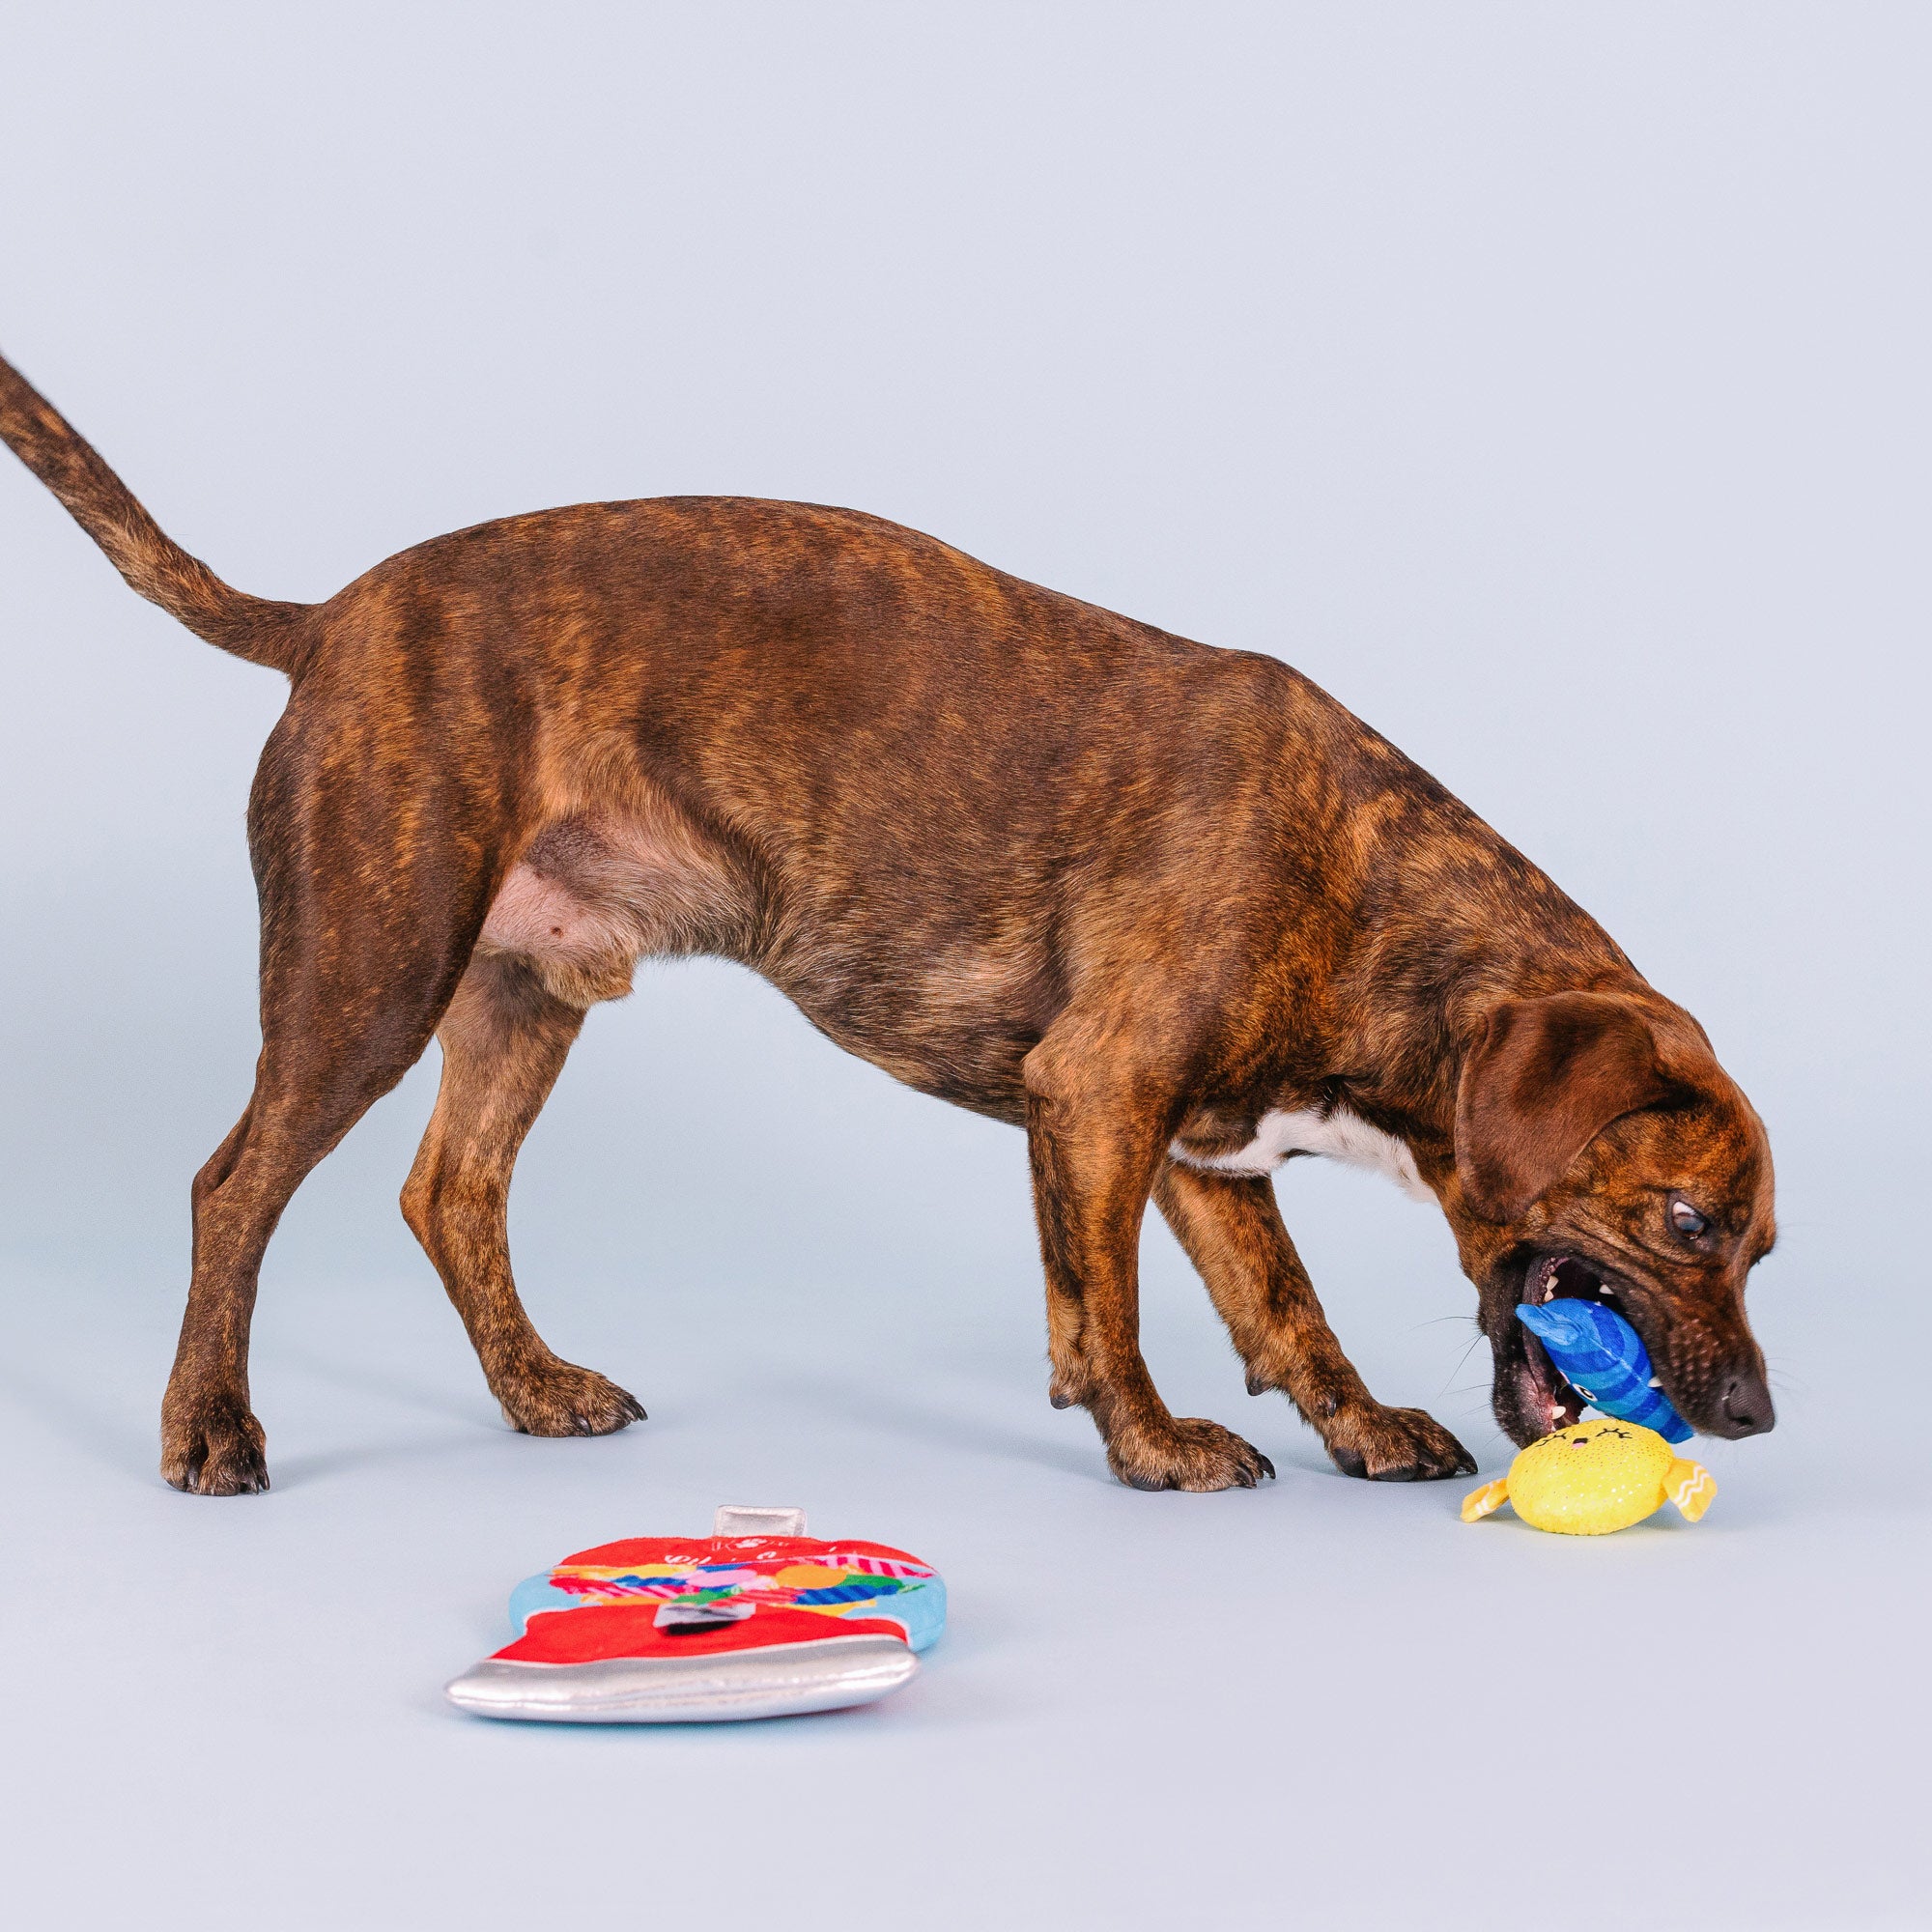 The Best Dog Toys to Keep Dogs Busy